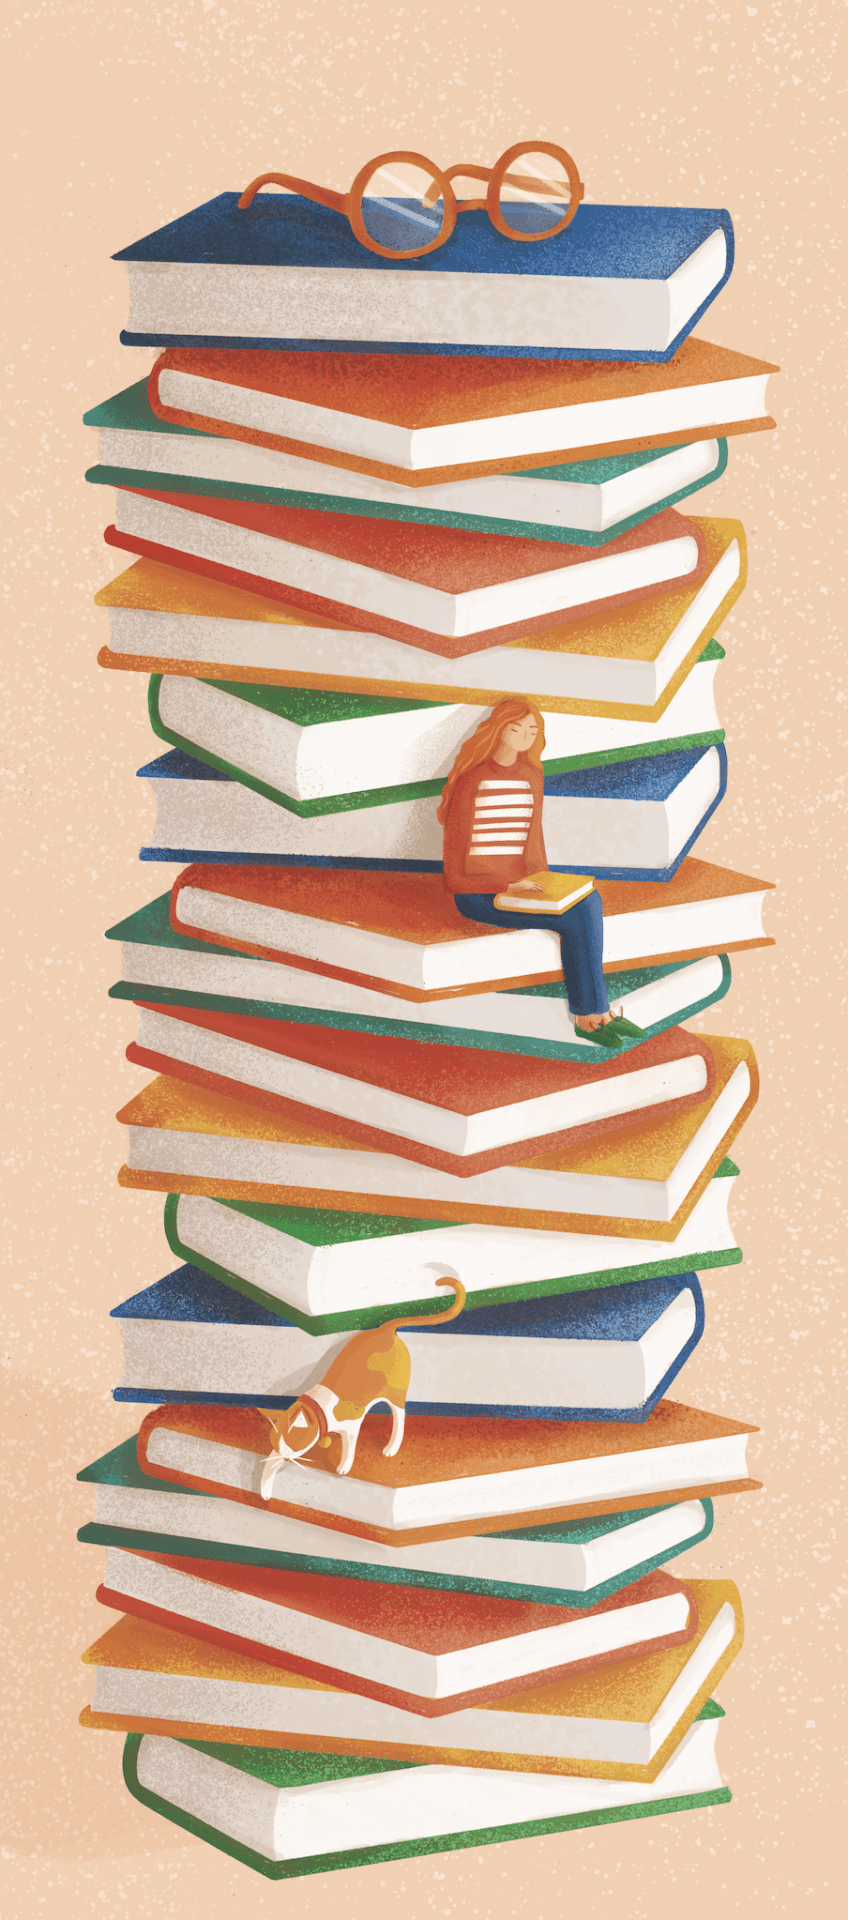 Illustration of an oversized stack of red, orange, green and blue books, with a woman sitting on the middle book reading and a cat playing below.